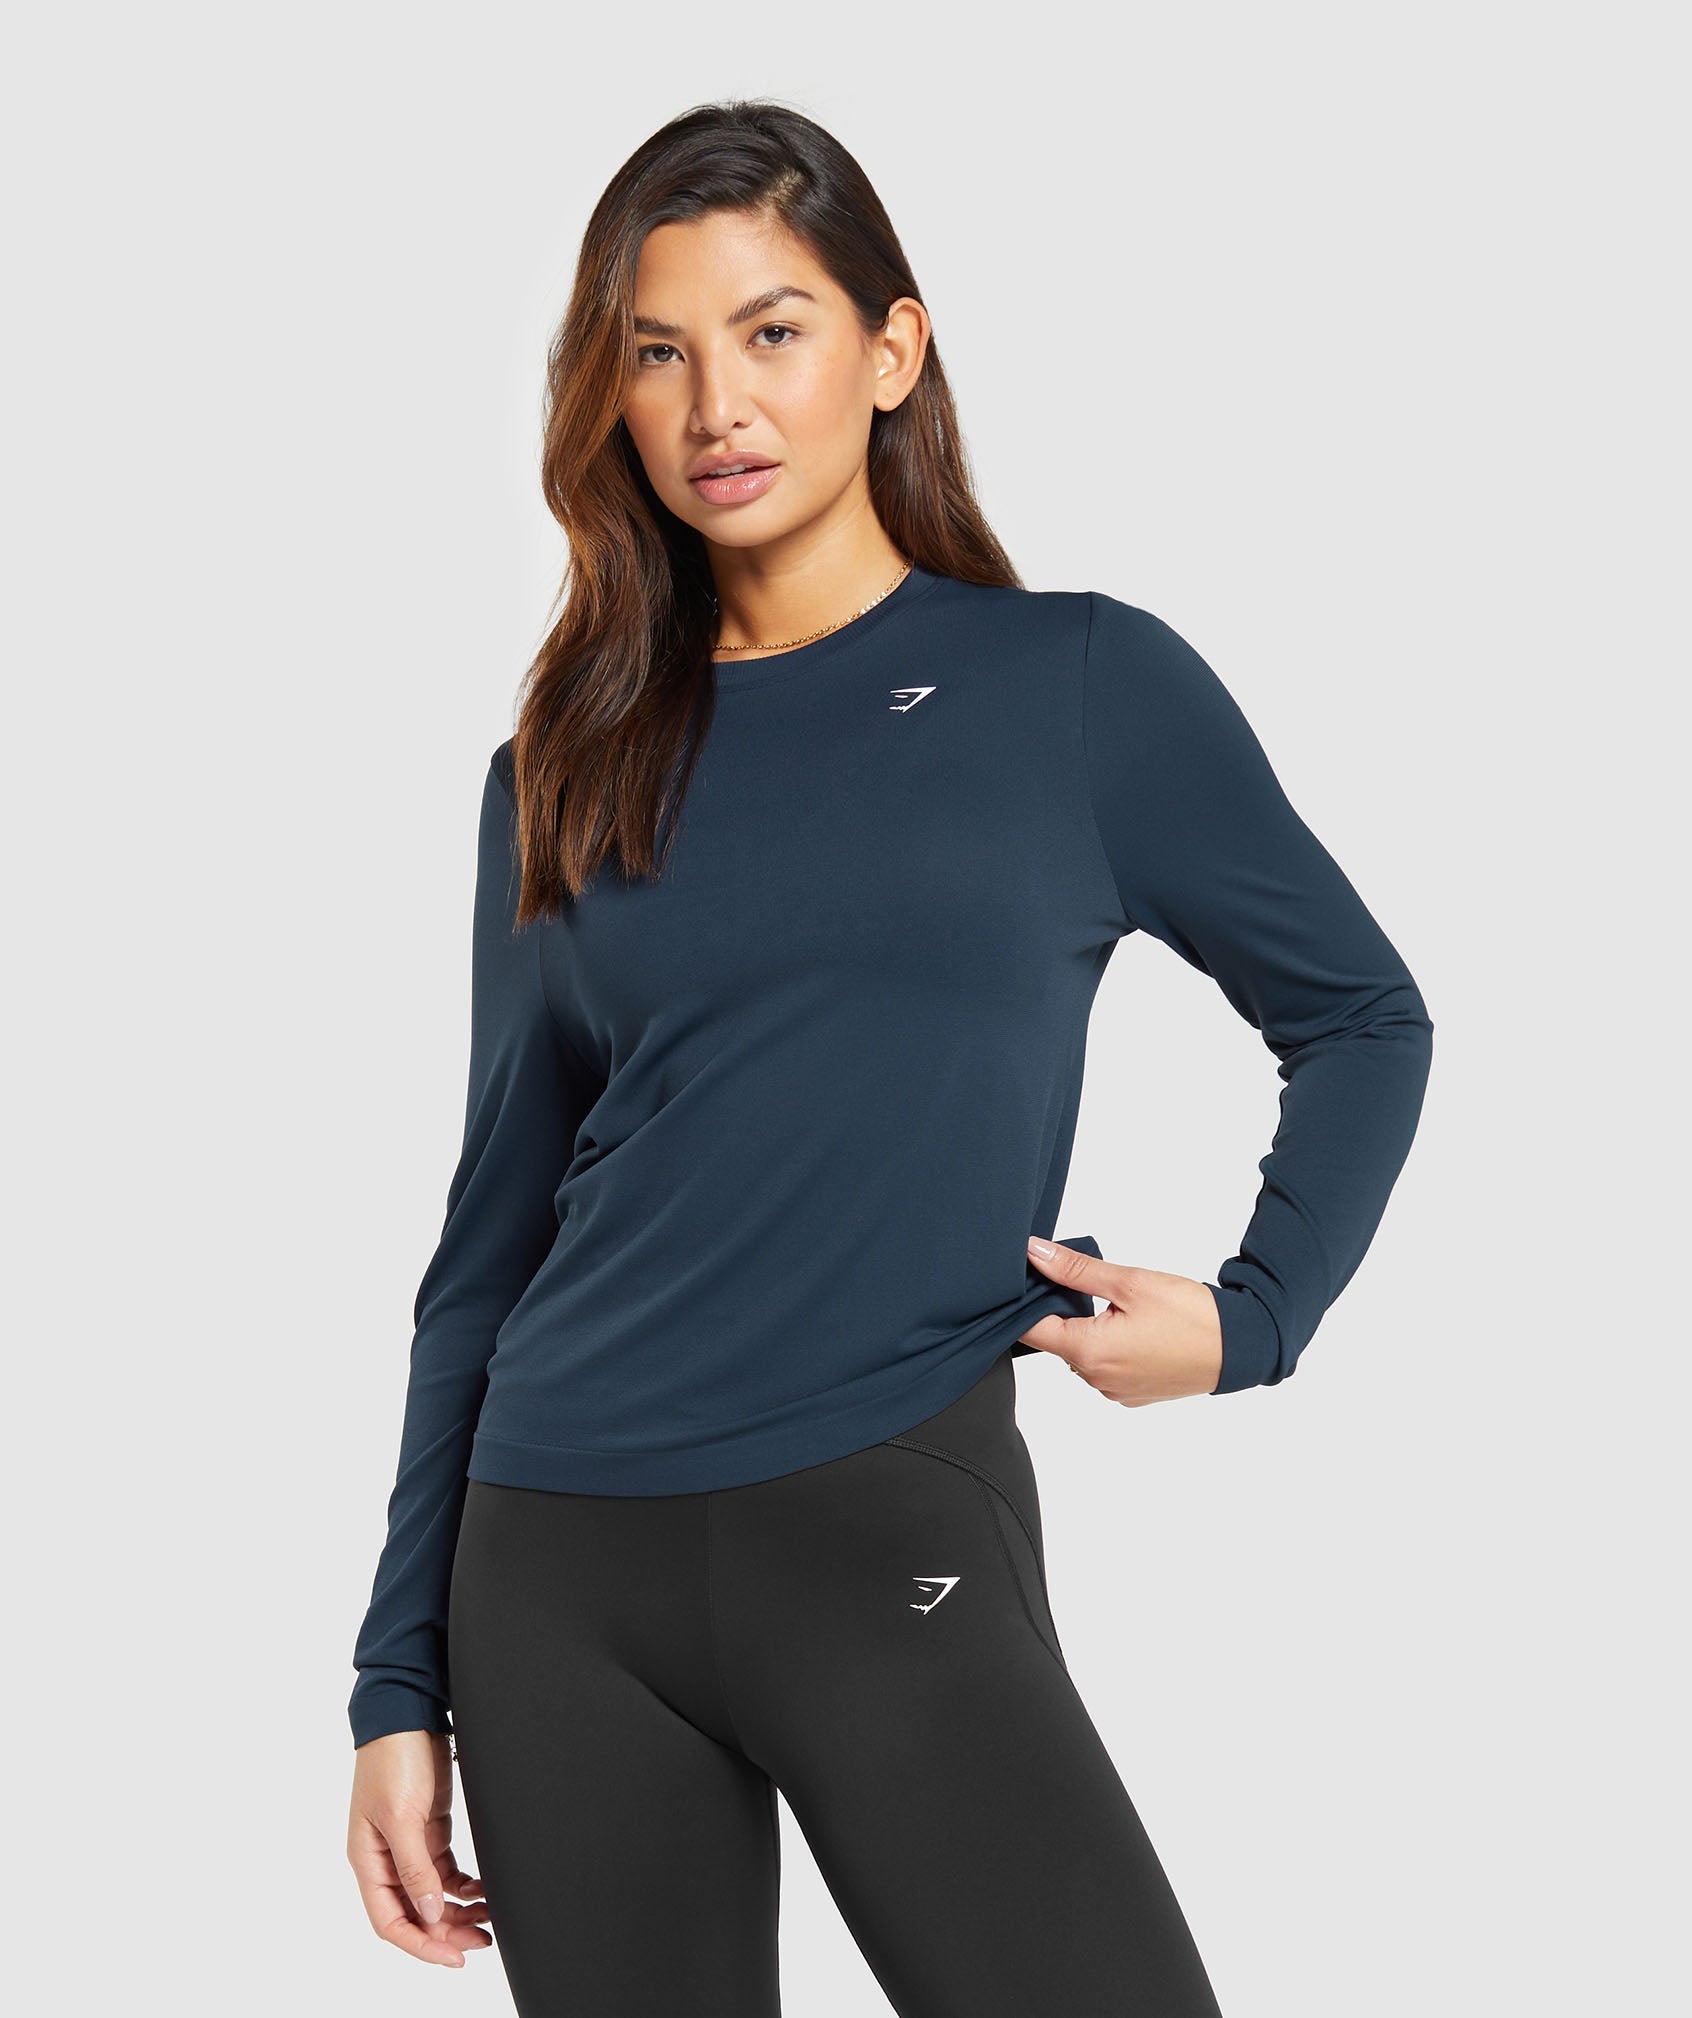 Everyday Seamless Long Sleeve Top in Navy - view 1